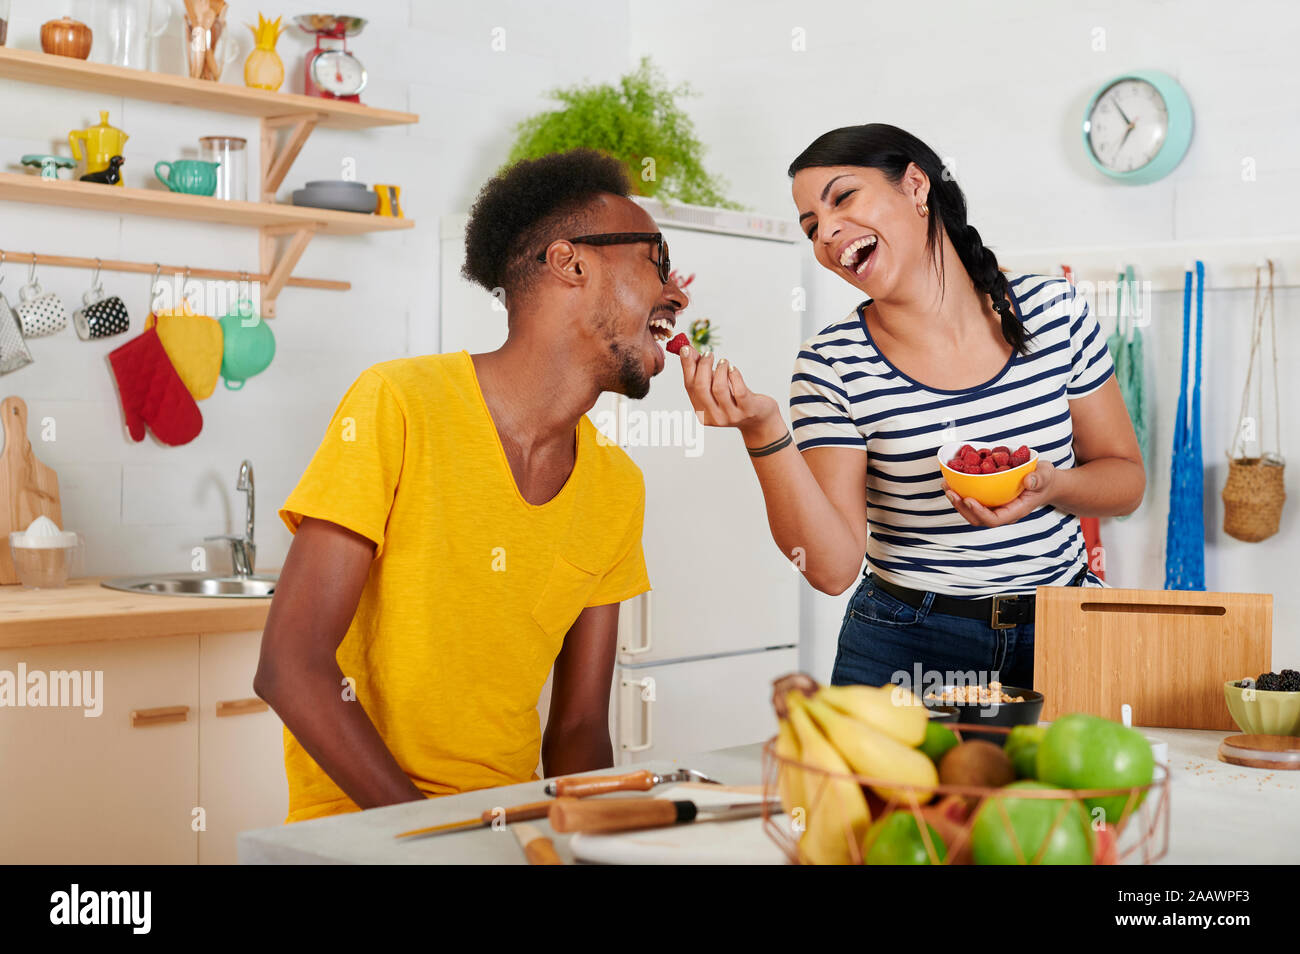 Multiethnic couple breakfasting together in the kitchen Stock Photo